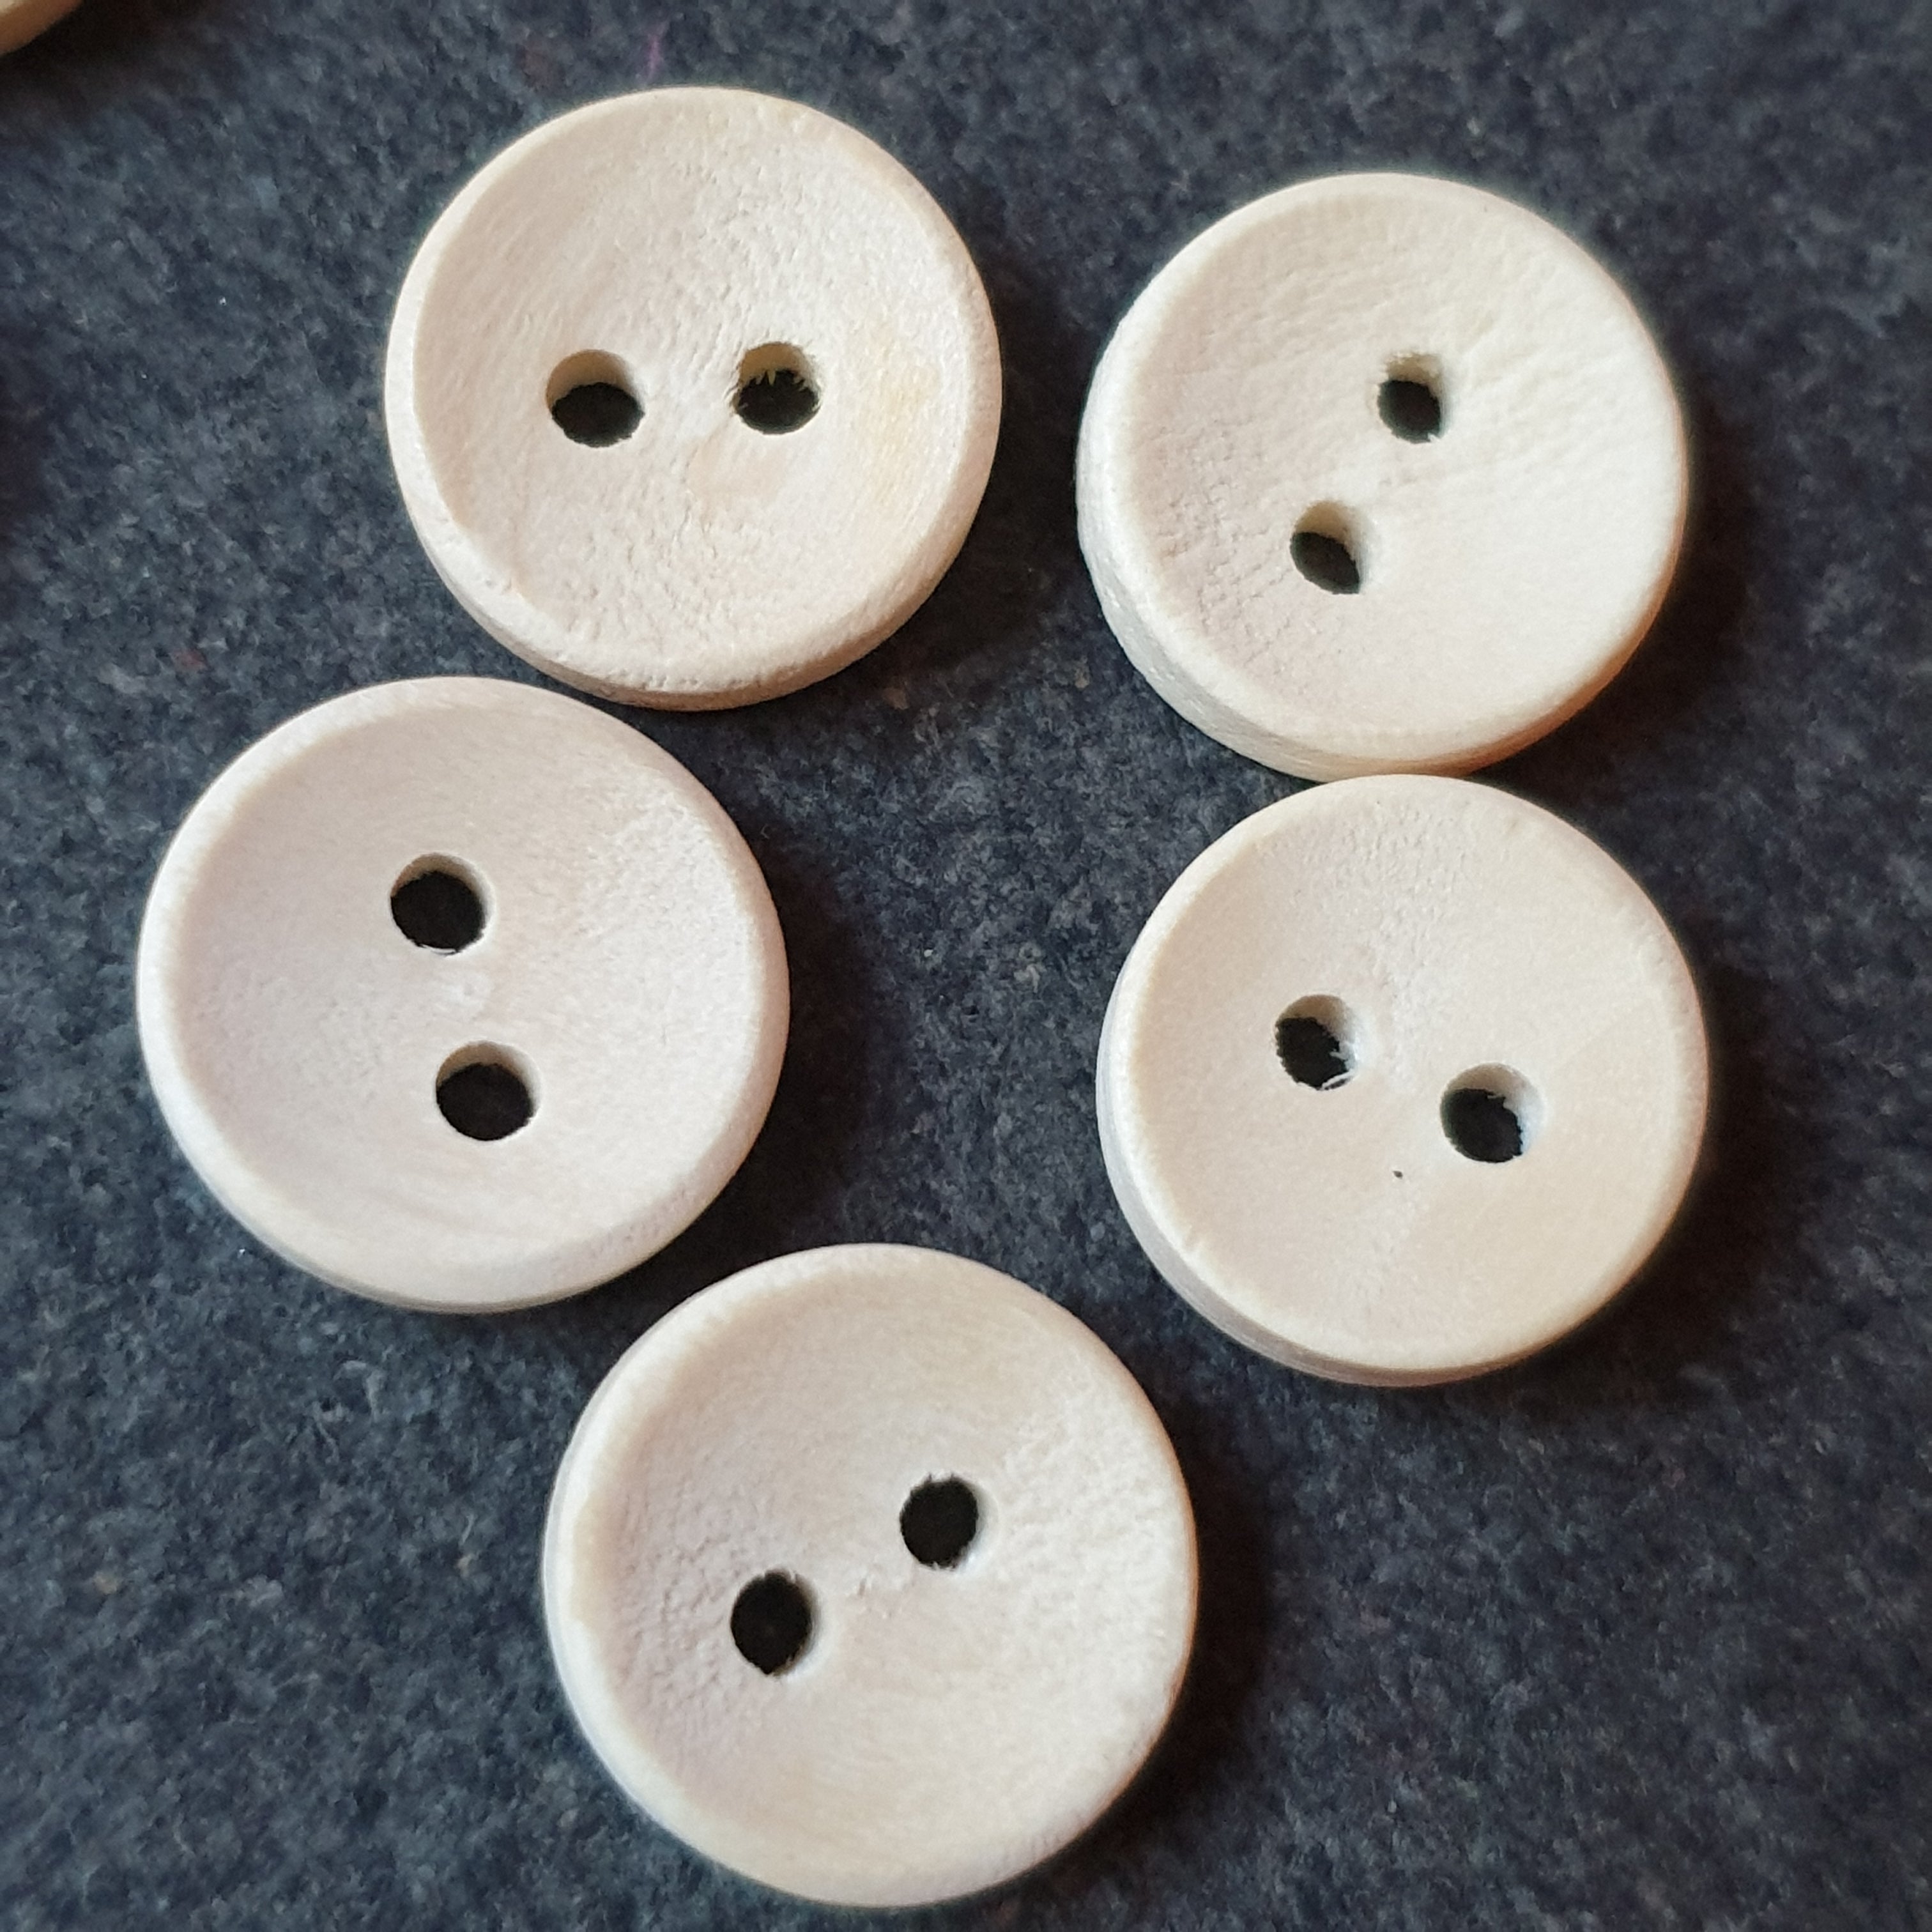 MajorCrafts 60pcs 13mm Light Brown 2 Holes Small Round Wooden Sewing Buttons